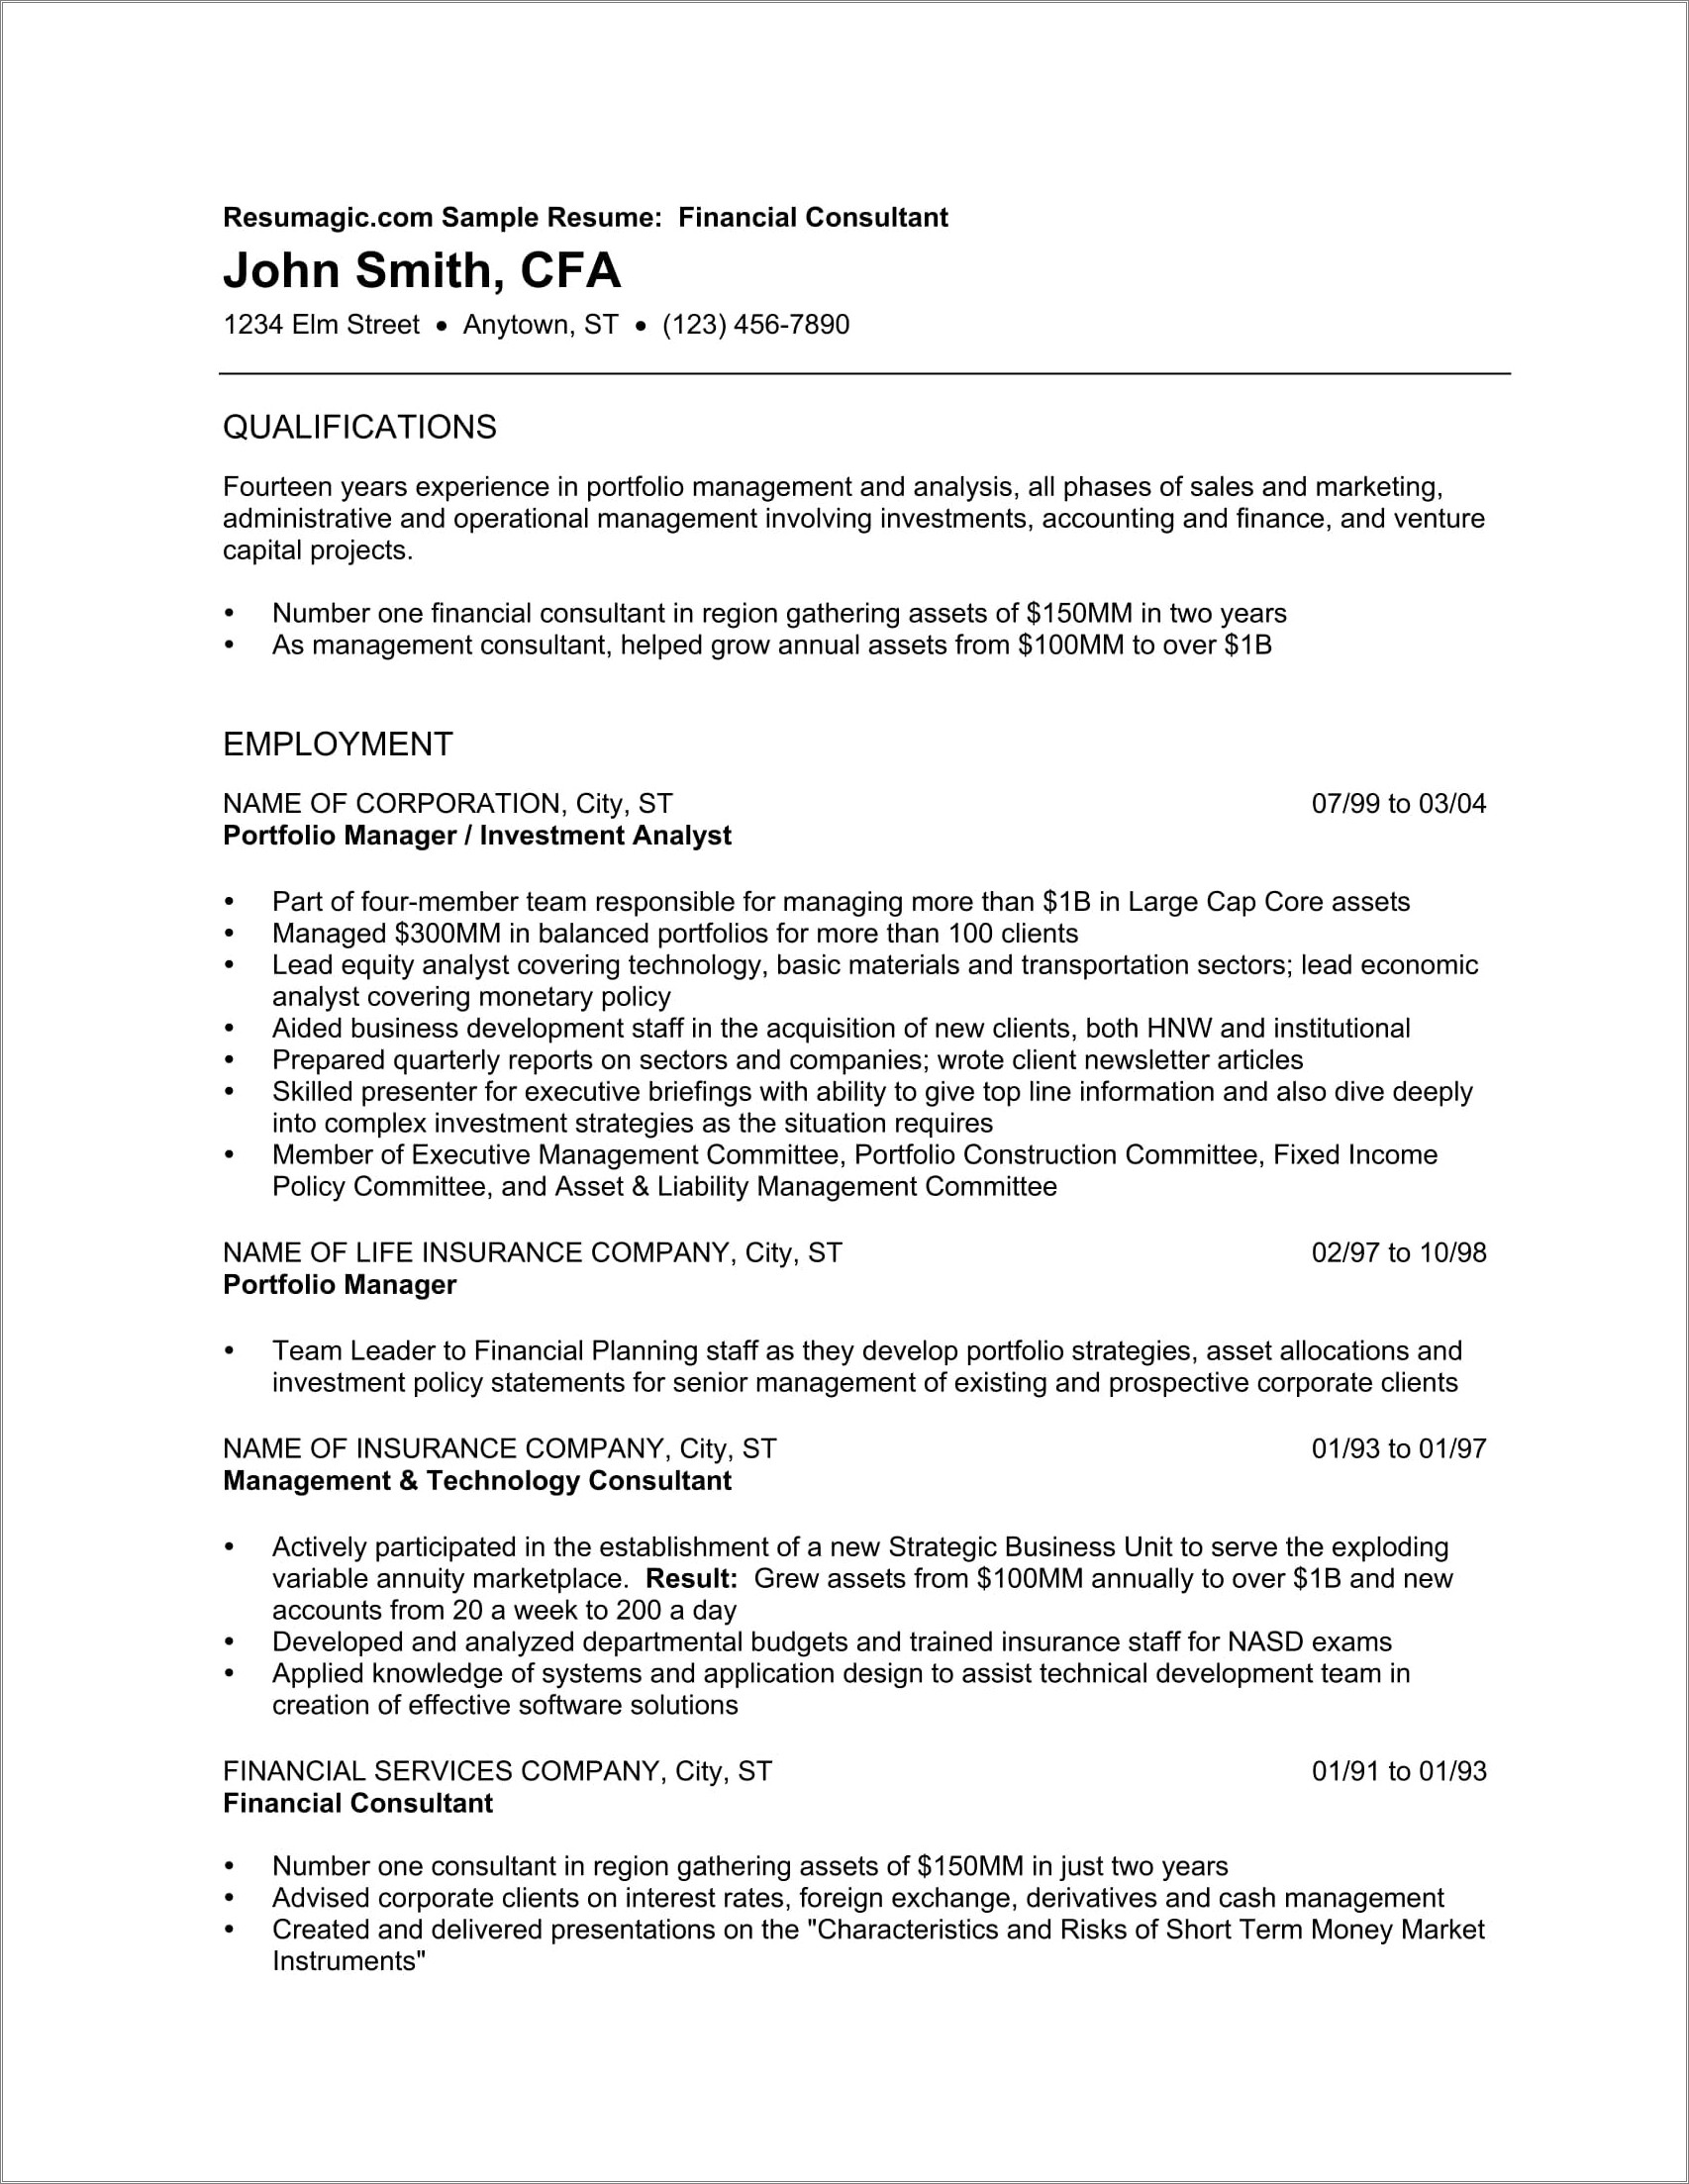 Experienced Investment Banking Analyst Resume Template